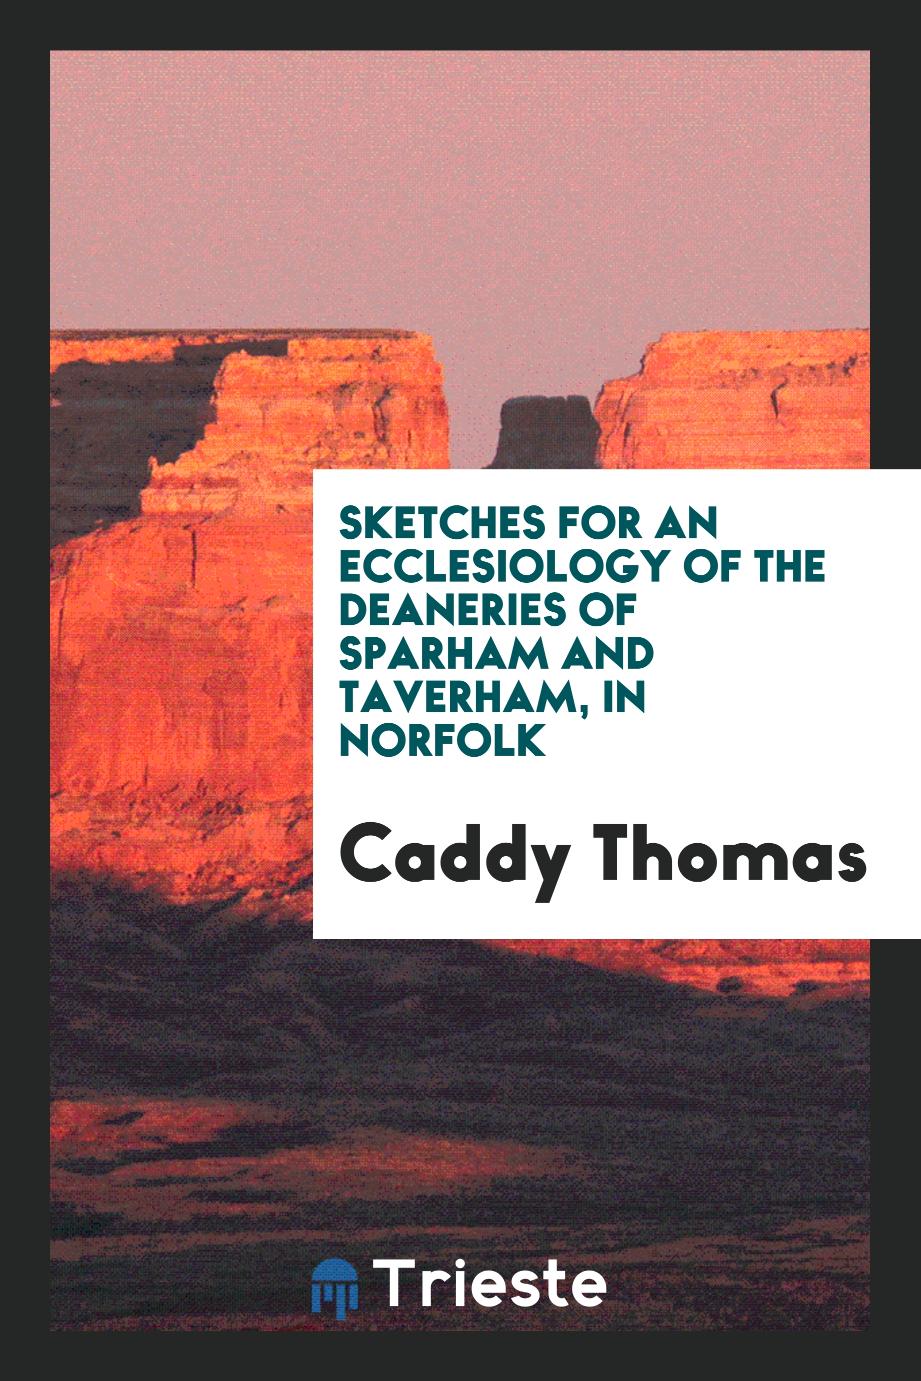 Sketches for an Ecclesiology of the Deaneries of Sparham and Taverham, in Norfolk